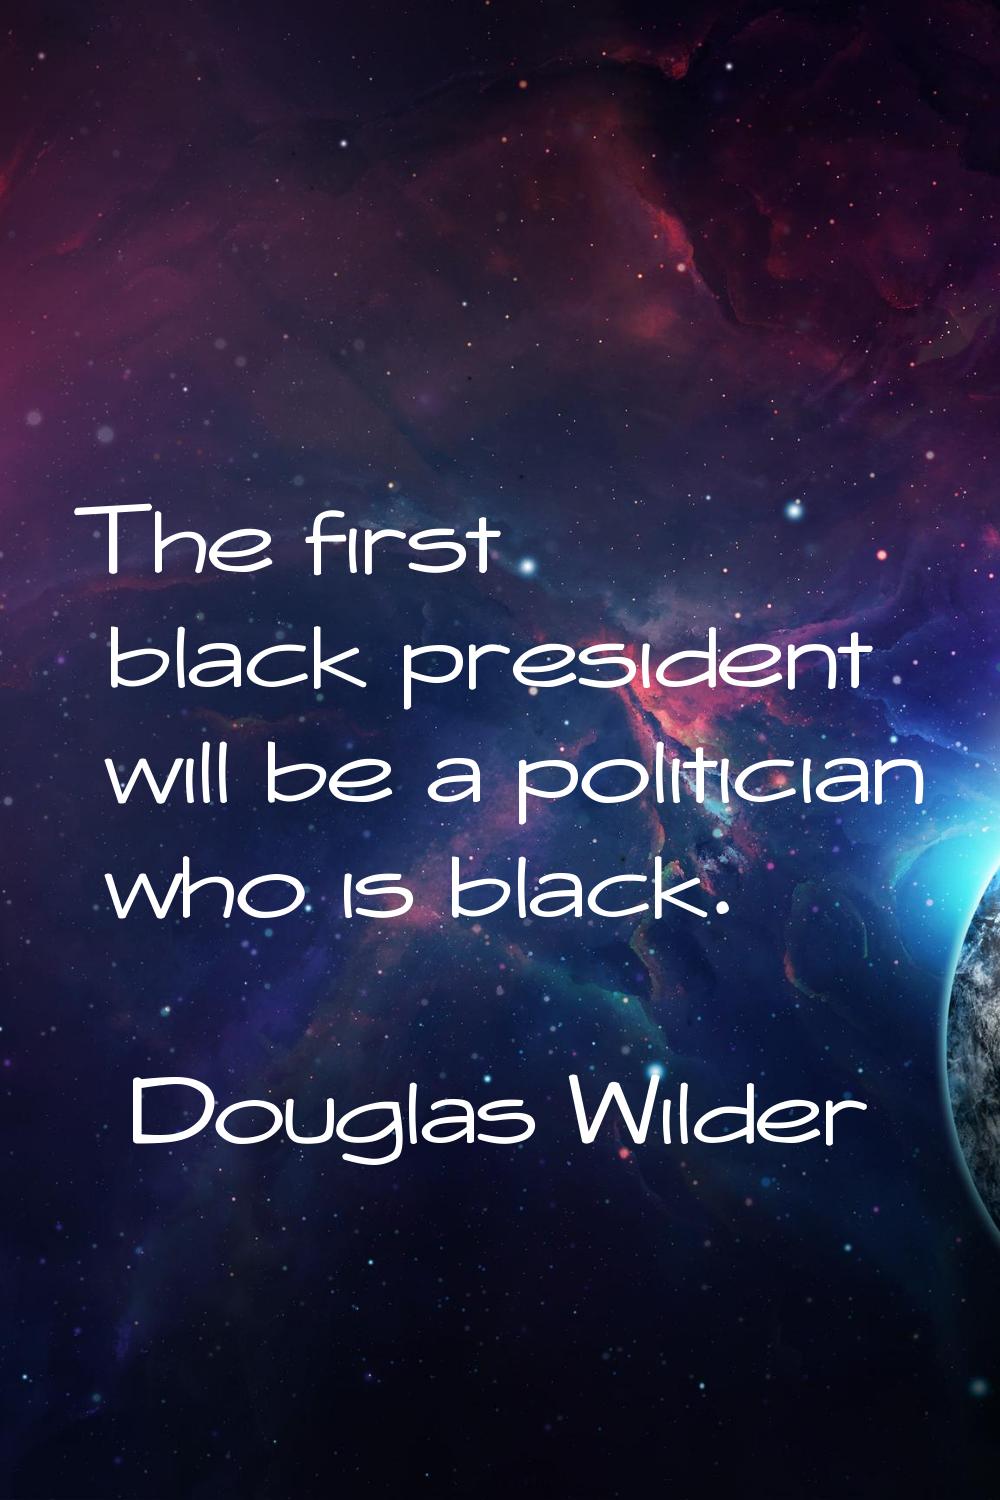 The first black president will be a politician who is black.